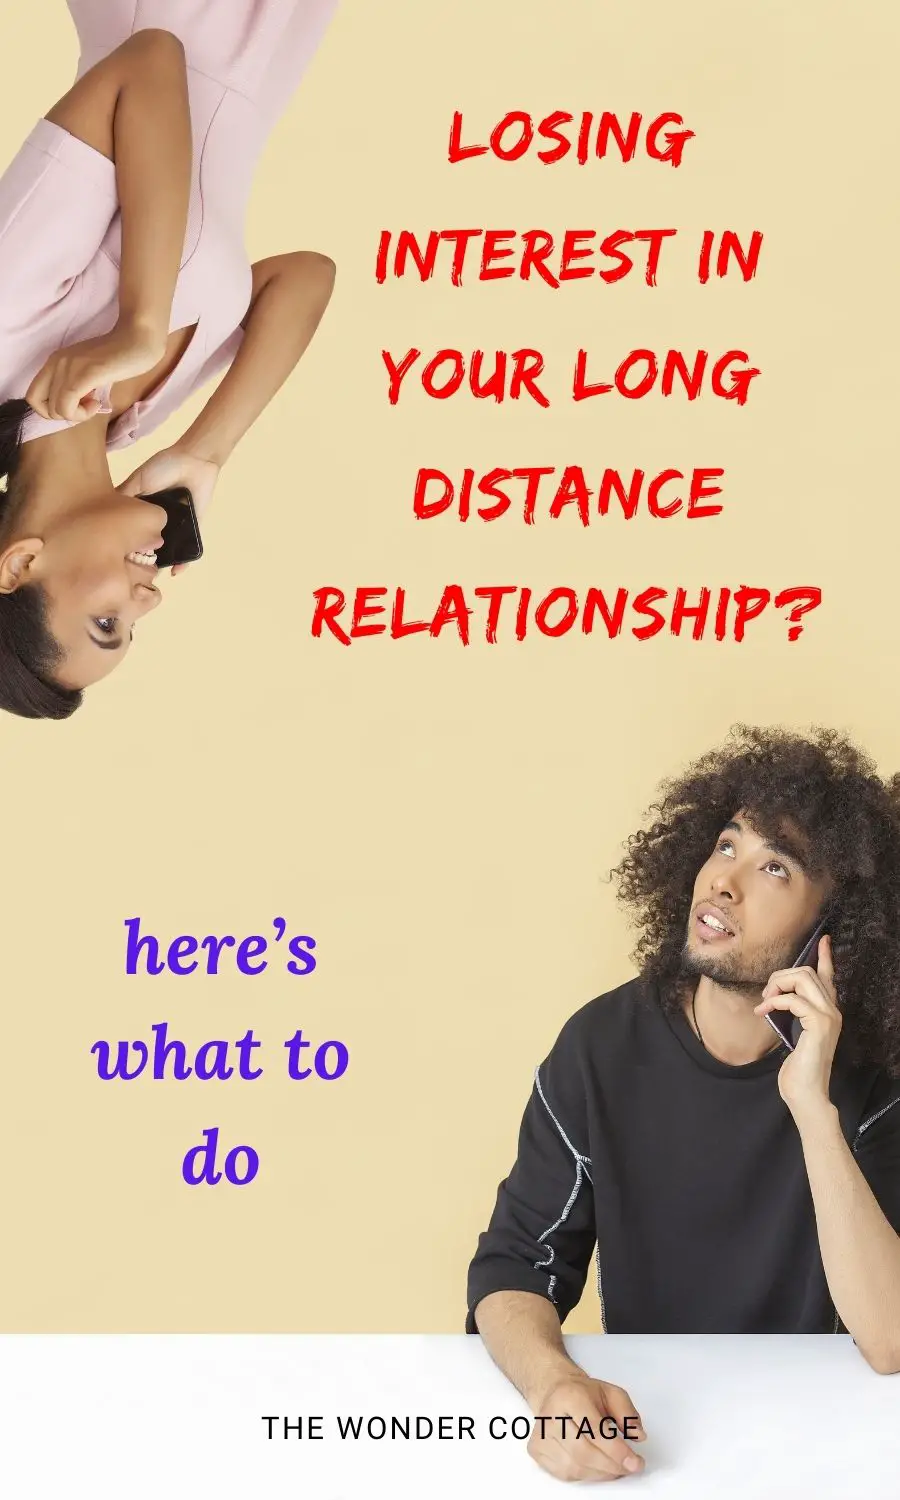 Losing Interest In Your Long Distance Relationship? Here’s What To Do